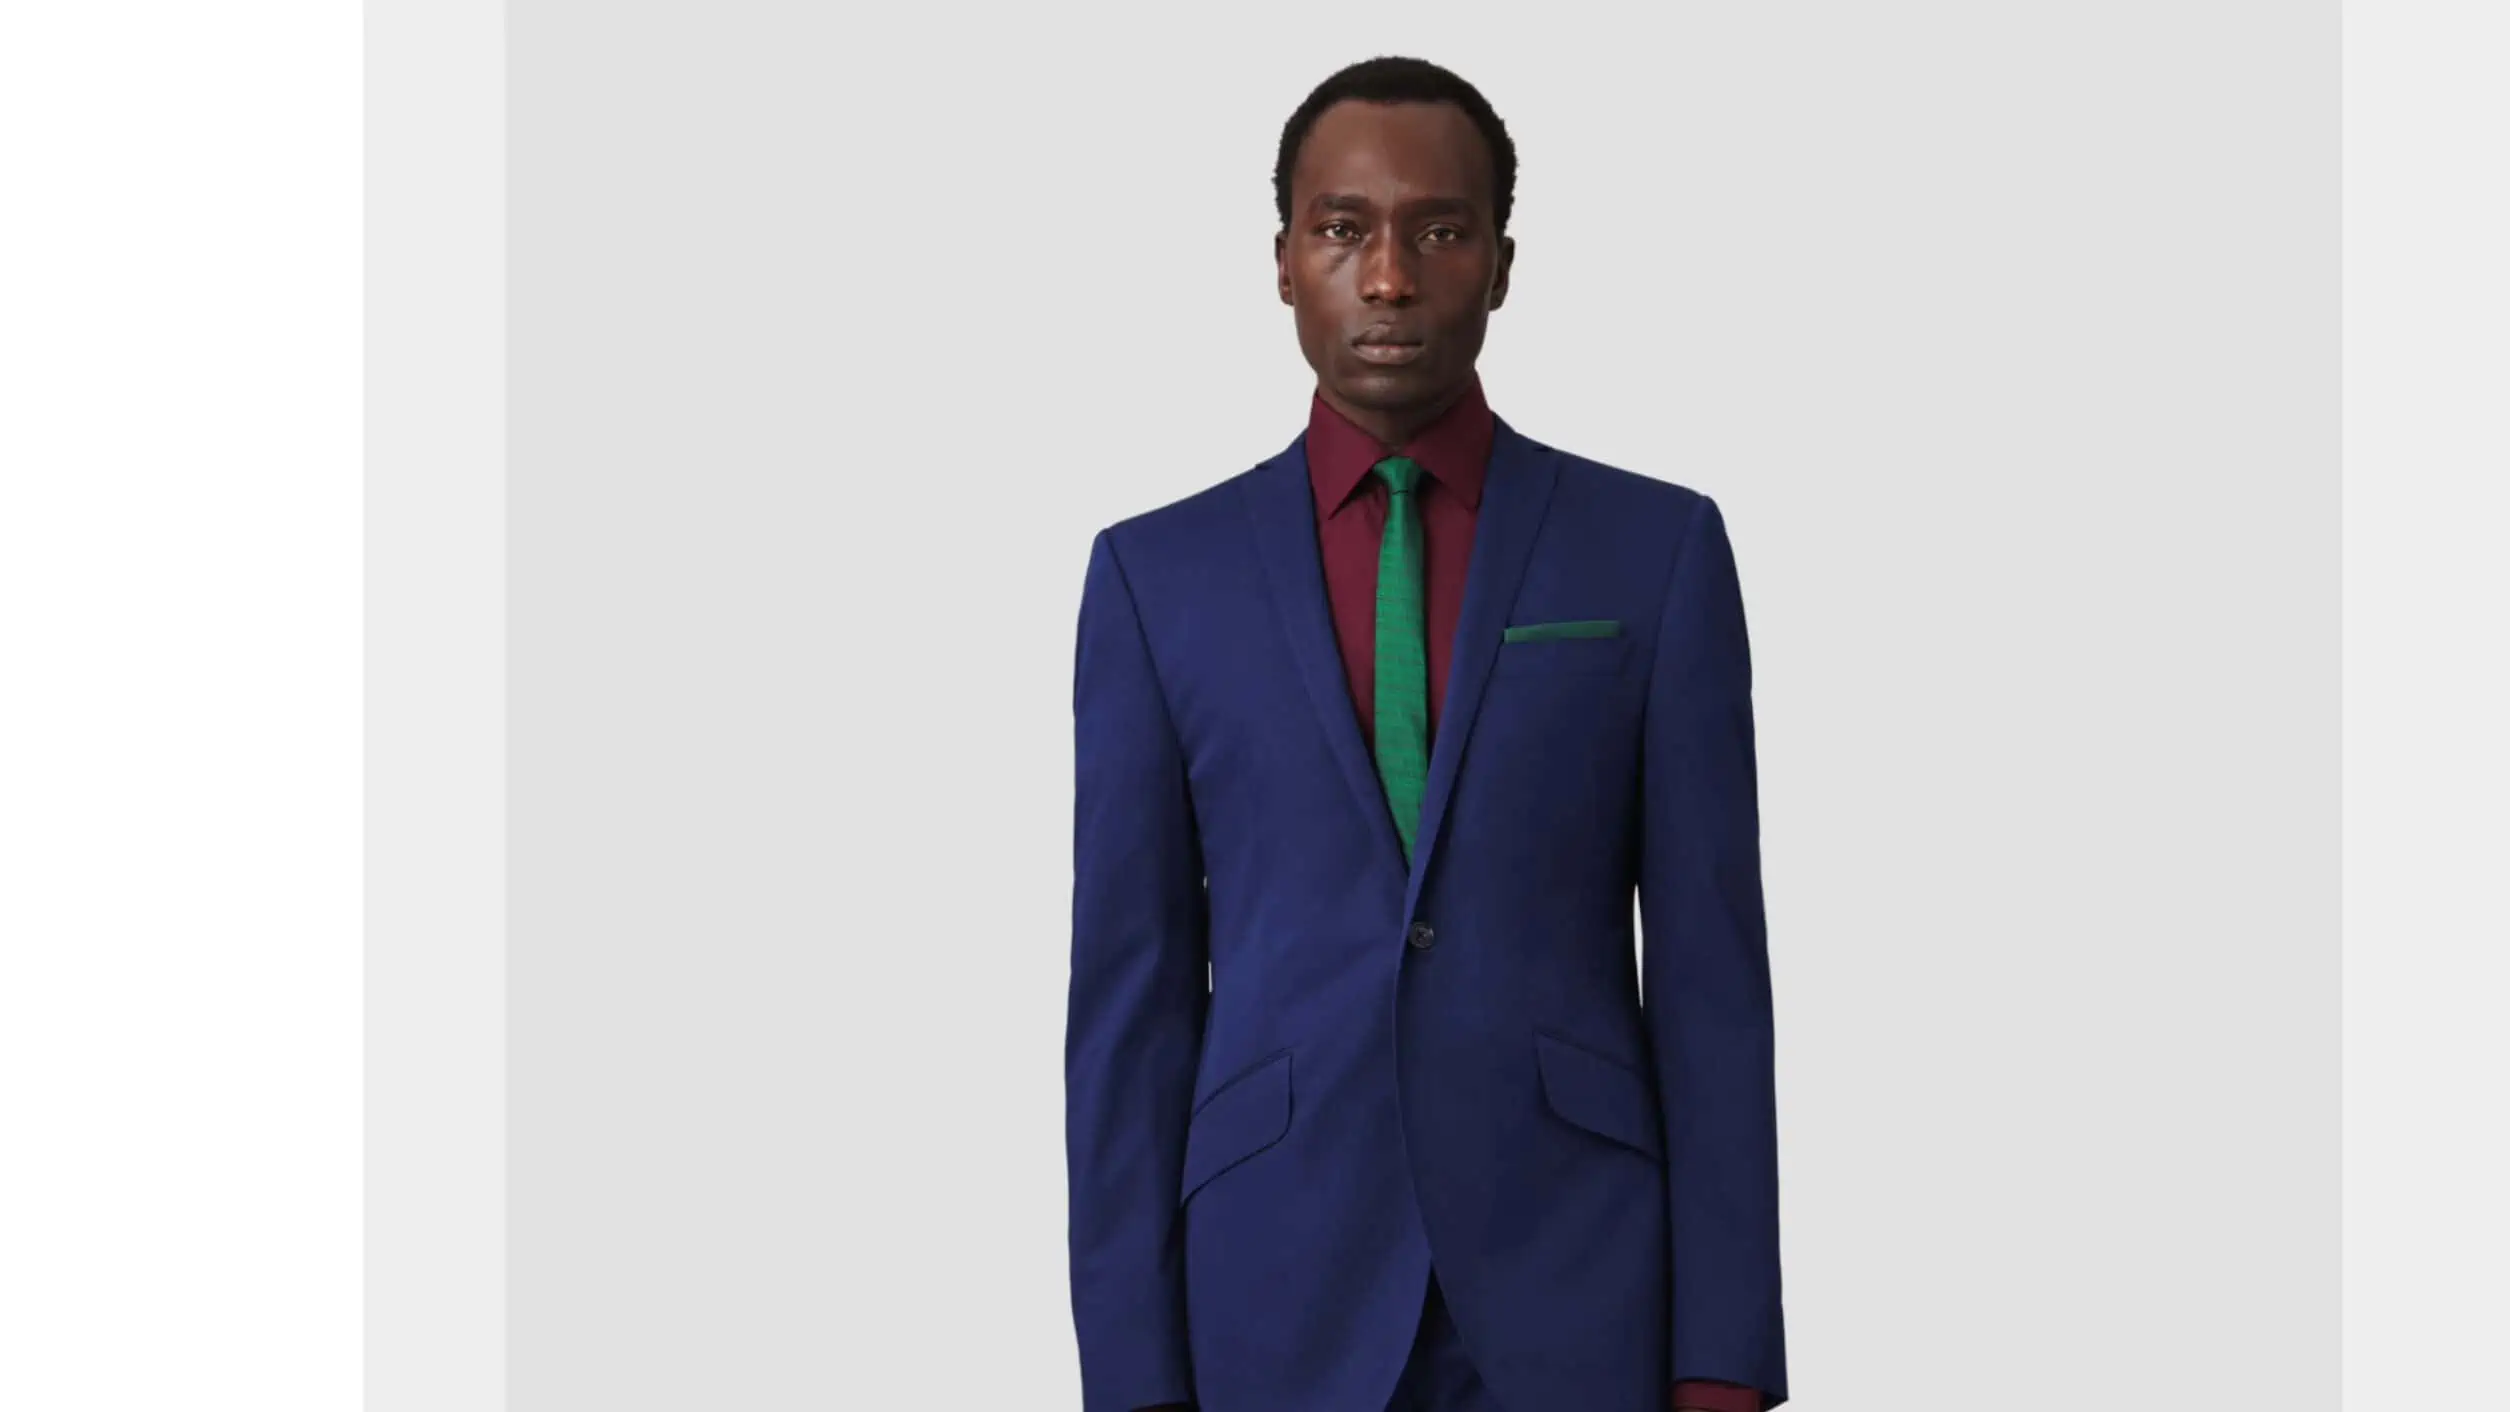 Bespoke style in a suit with the color coordination of a blue suit, green necktie and red dress shirt.